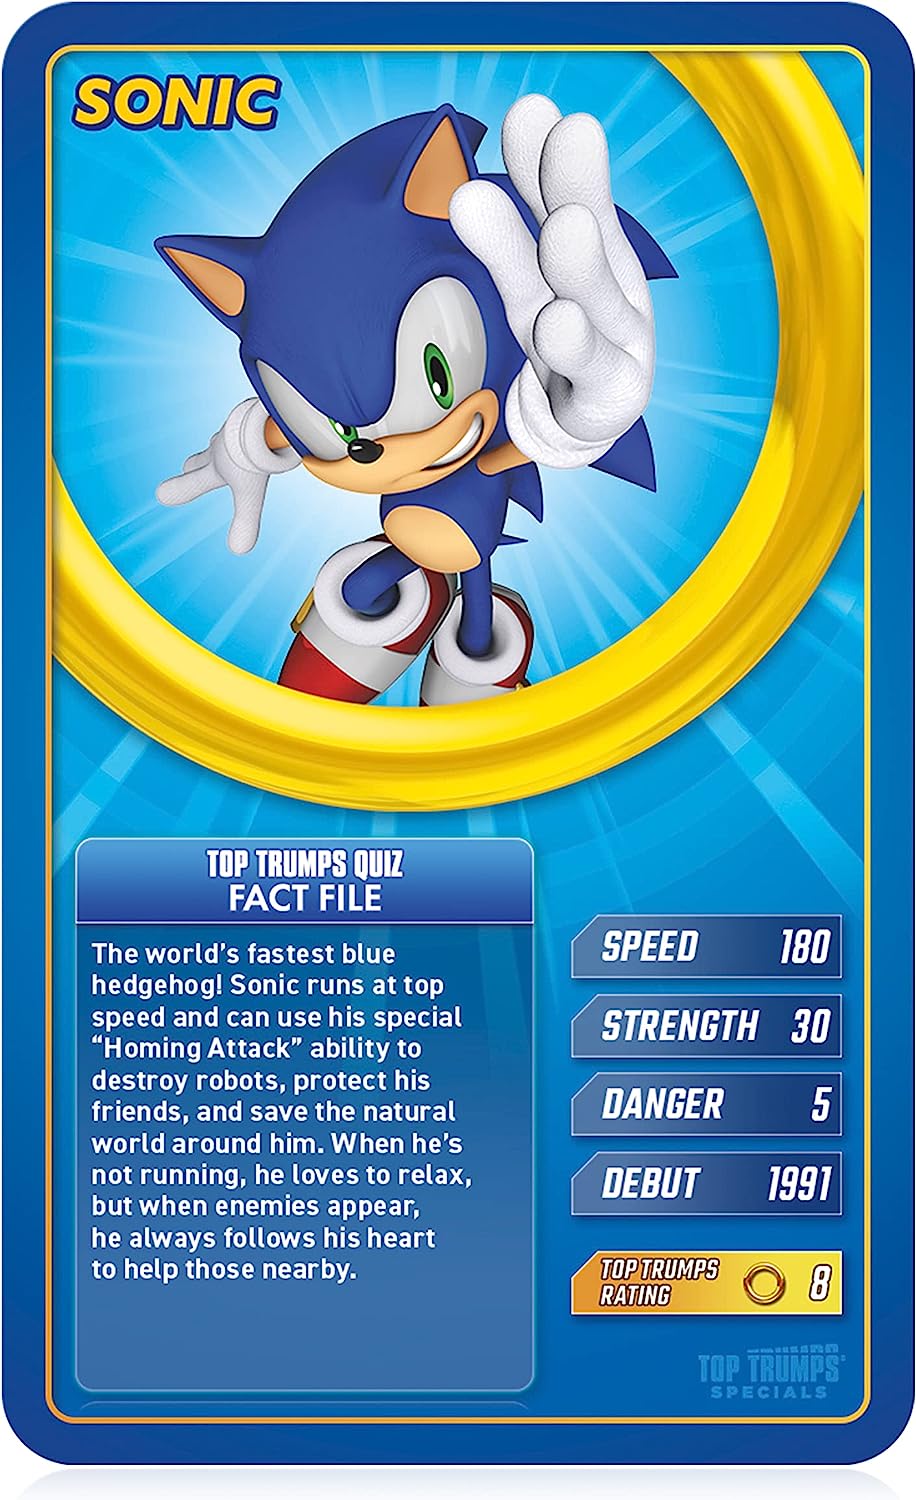 Sonic The Hedgehog Top Trumps Specials Card Game, Educational card game